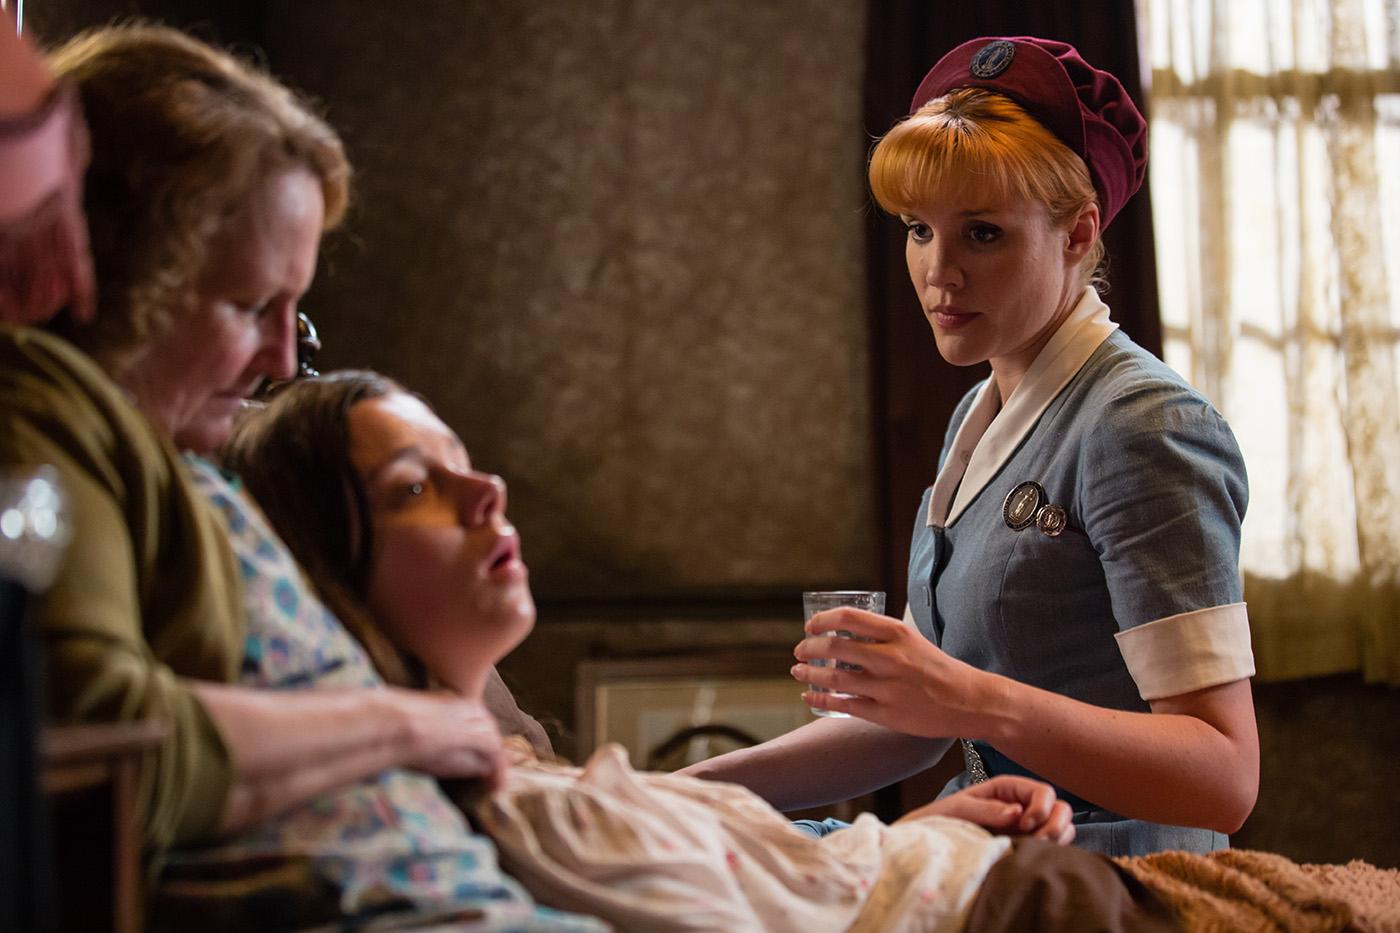 Patsy attends a home birth in Call the Midwife. Photo: Red Productions Ltd 2015